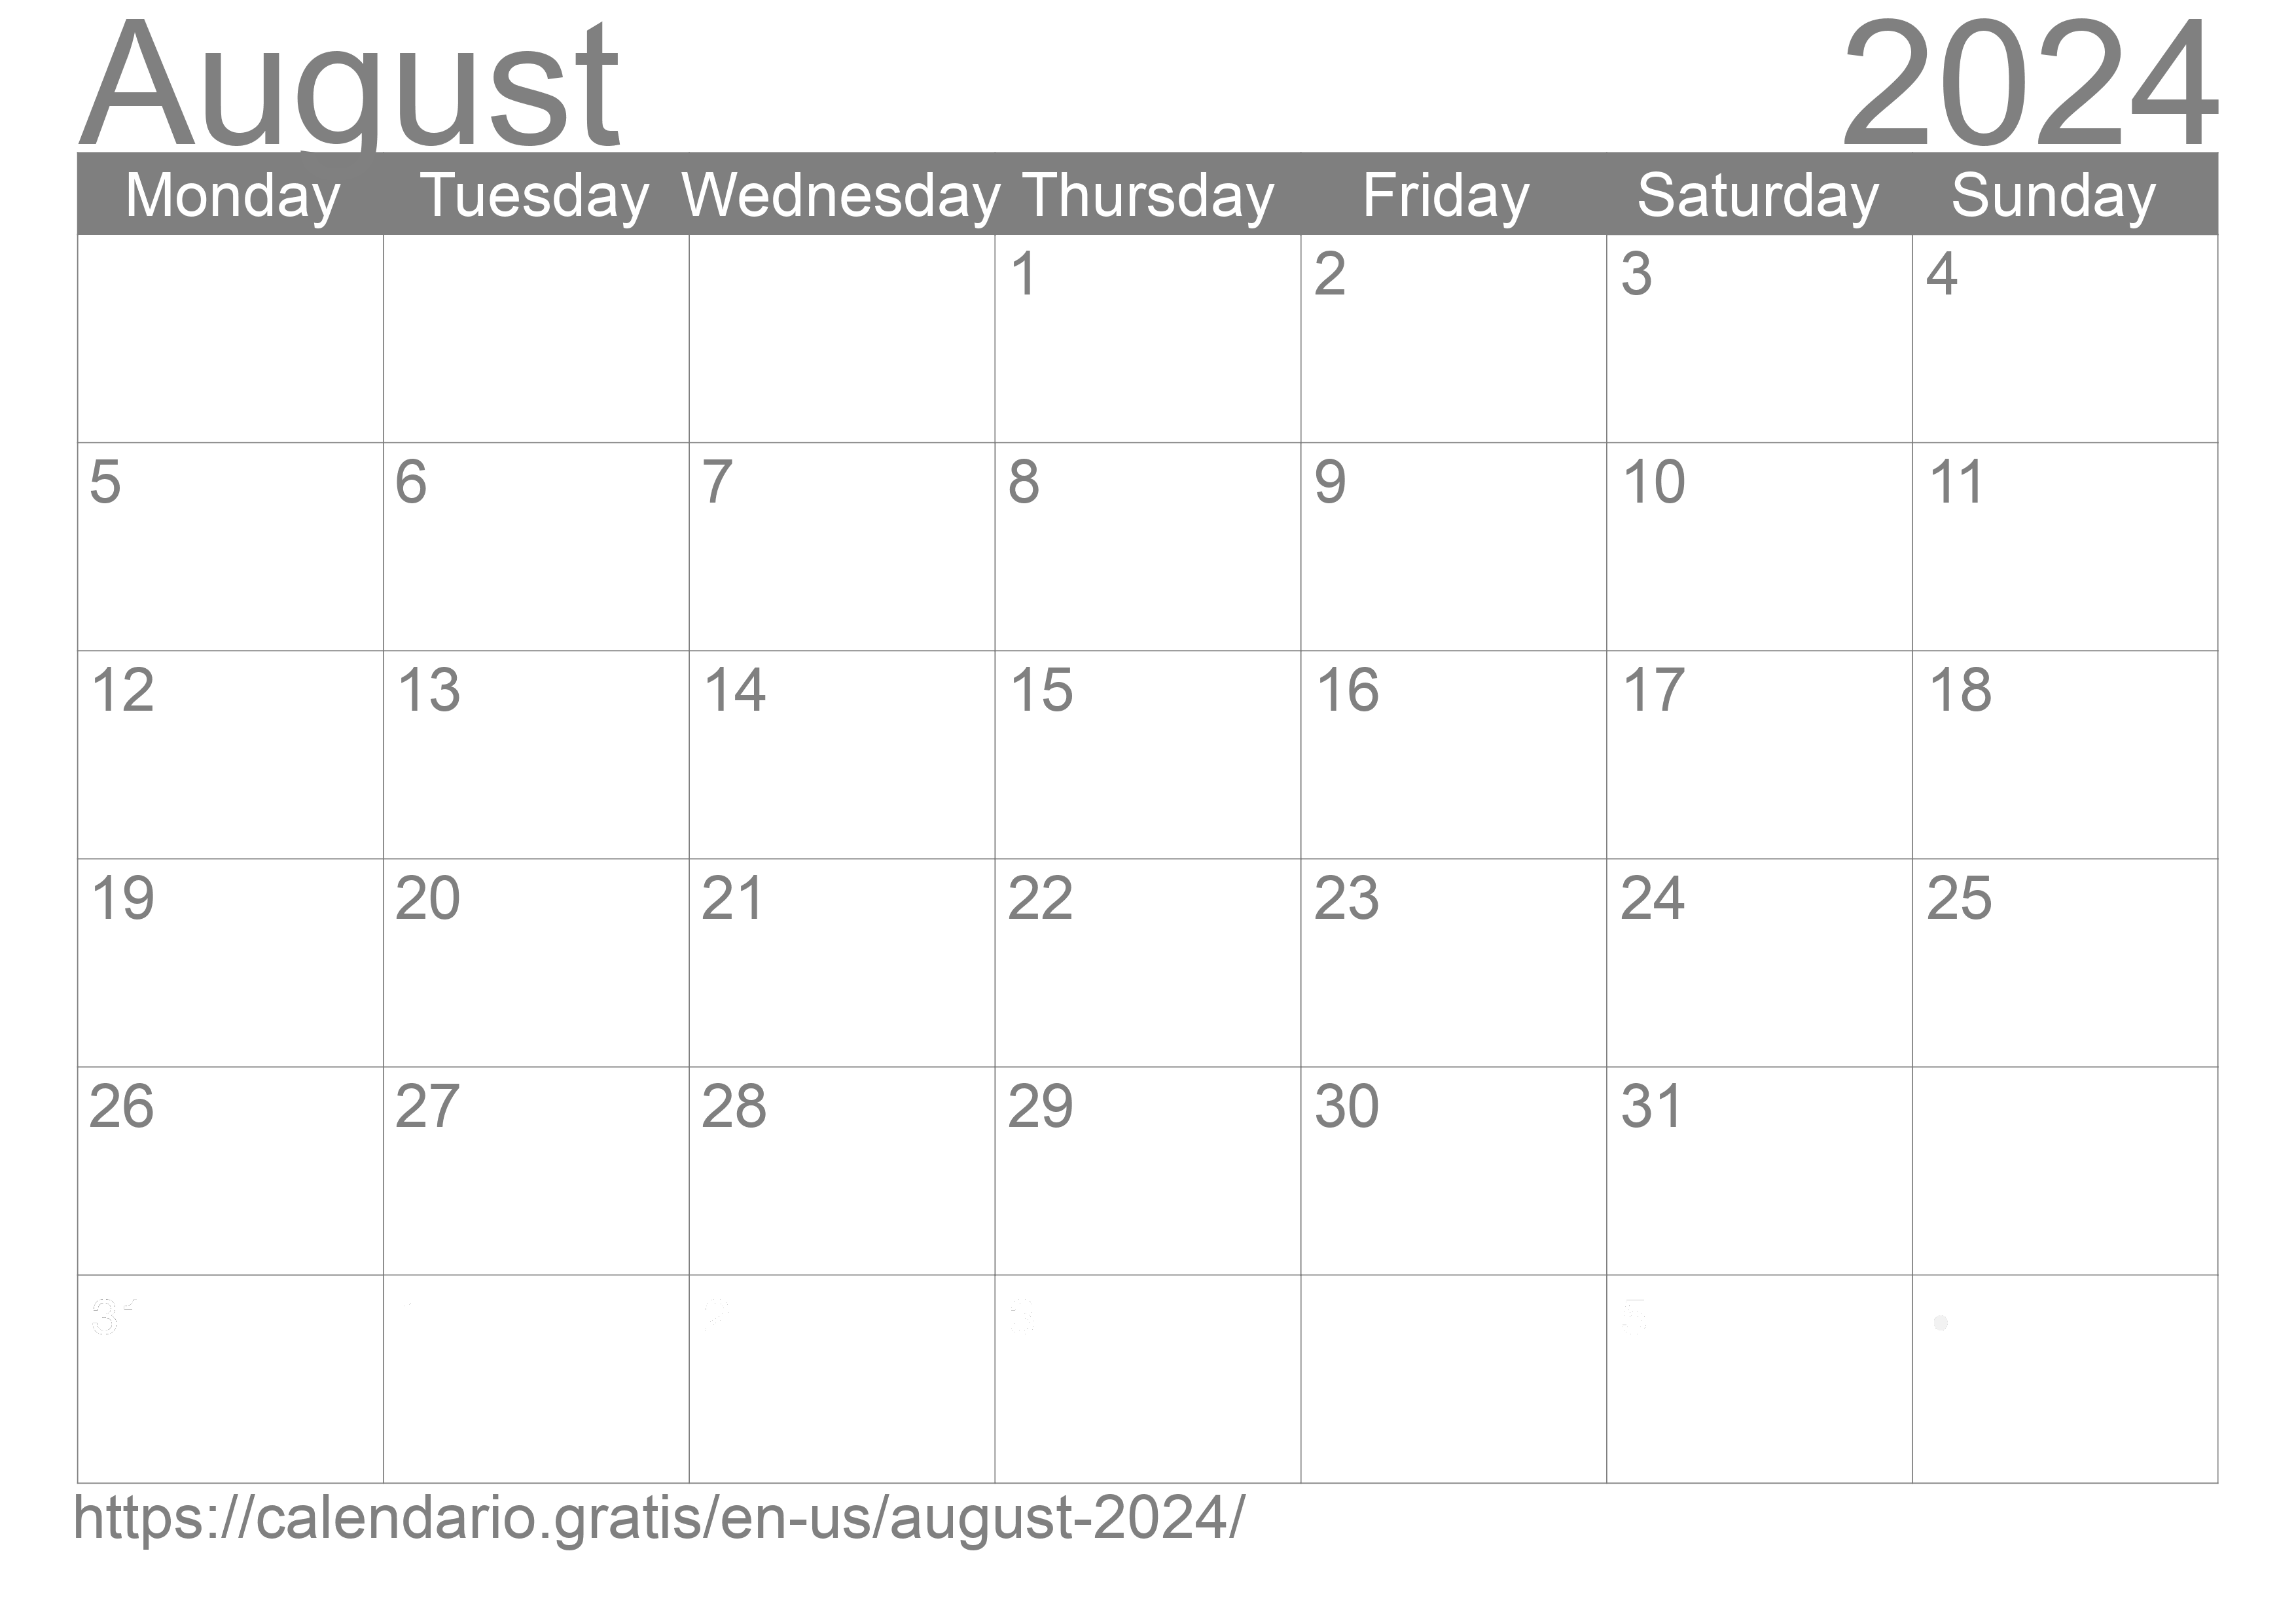 Calendar August 2024 from United States of America in English ☑️